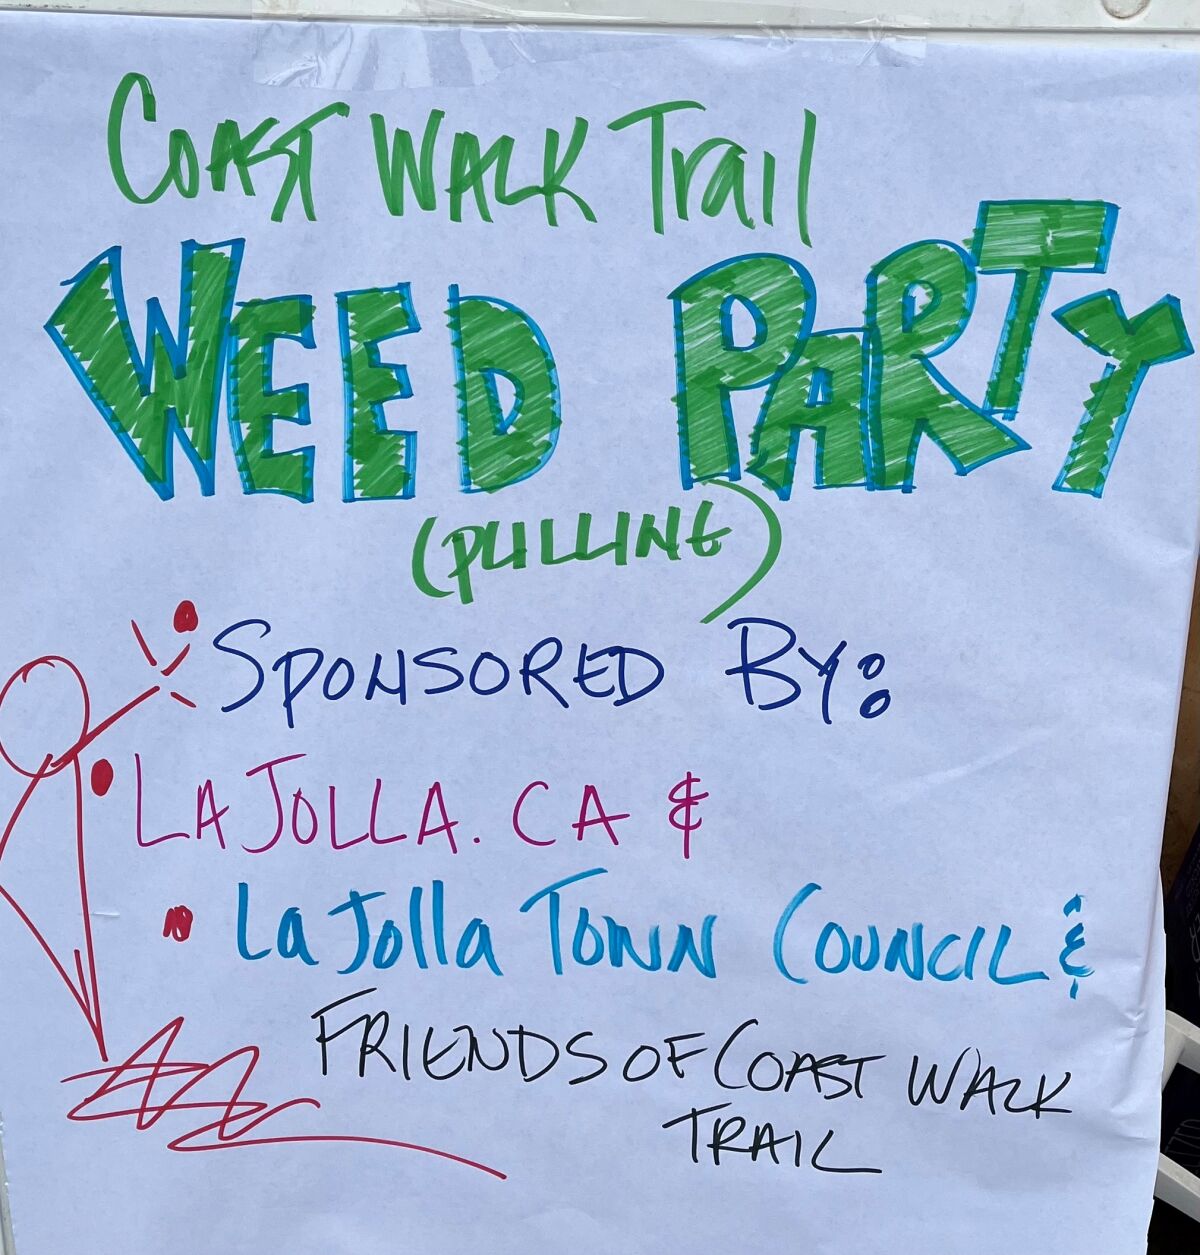 A sign welcomes volunteers to the March 26 Coast Walk Trail weed-pulling party.